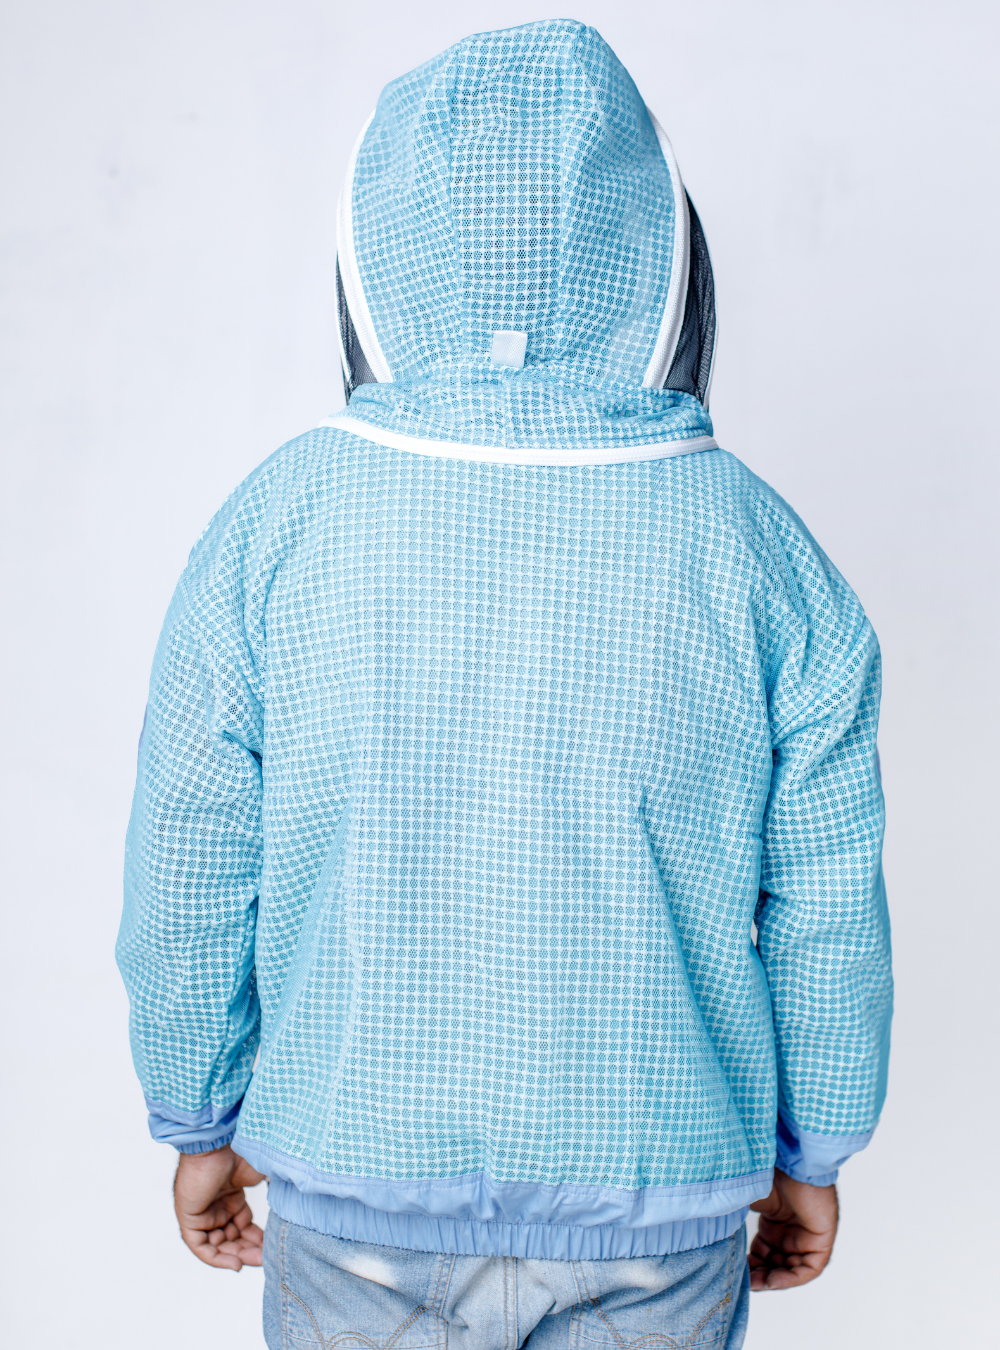 Aqua Blue Beekeeping jacket with adjustable hood and stretchable cuffs Back Look.